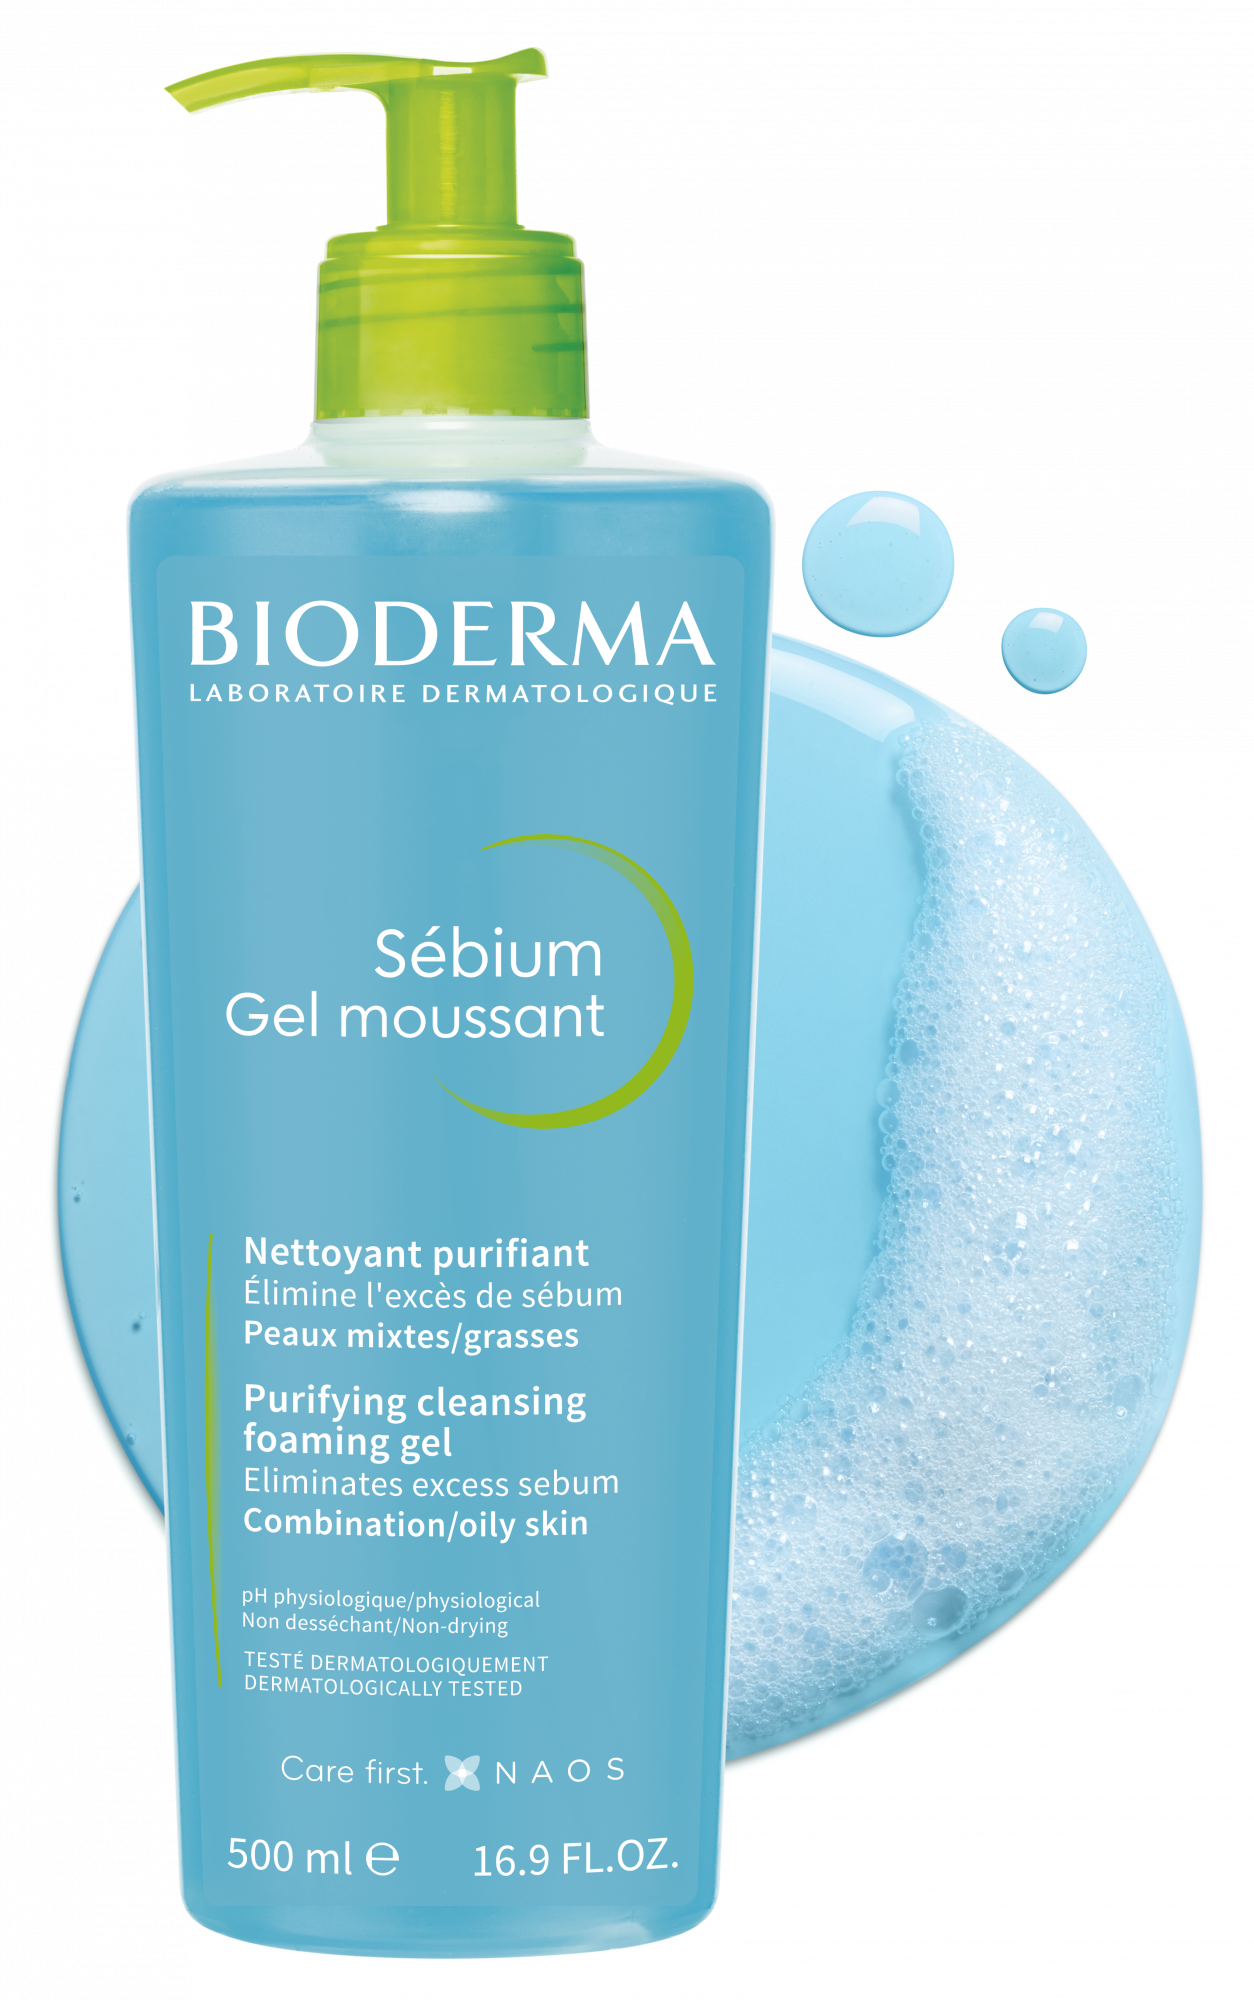 Sebium Gel Moussant Oily Acne Skin Cleaning- United States